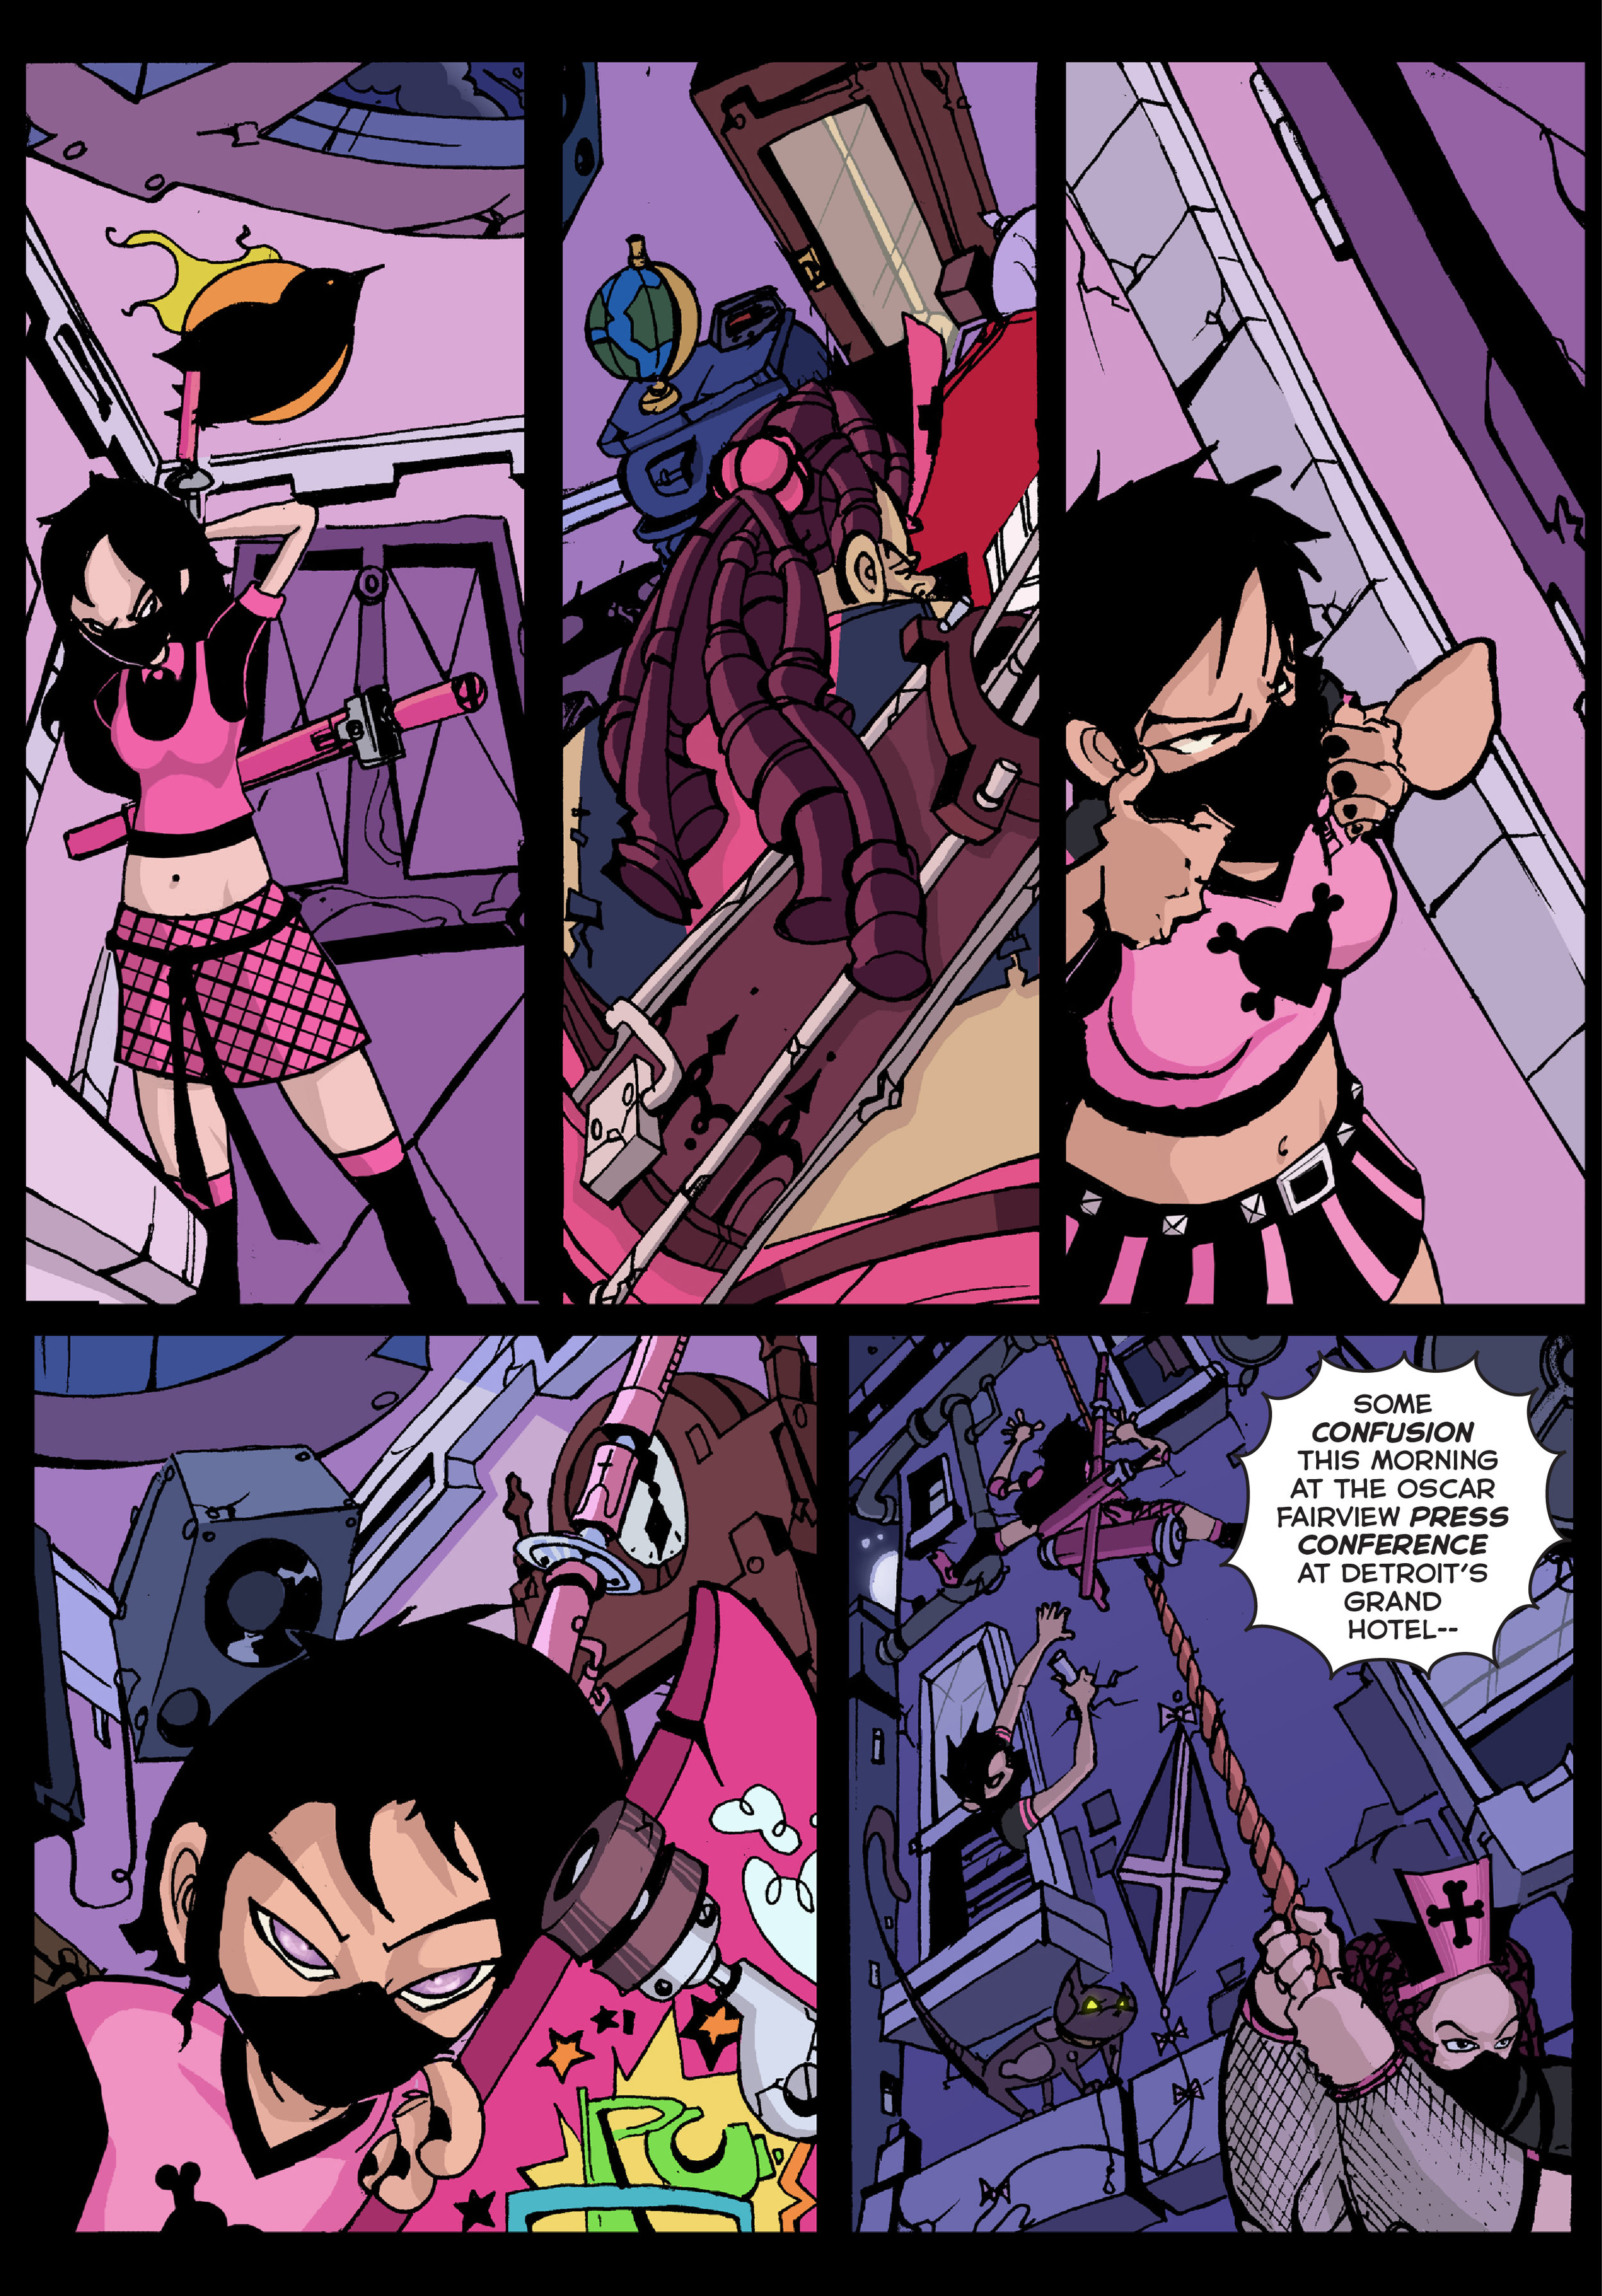 Pink Power 1 page 17.jpg